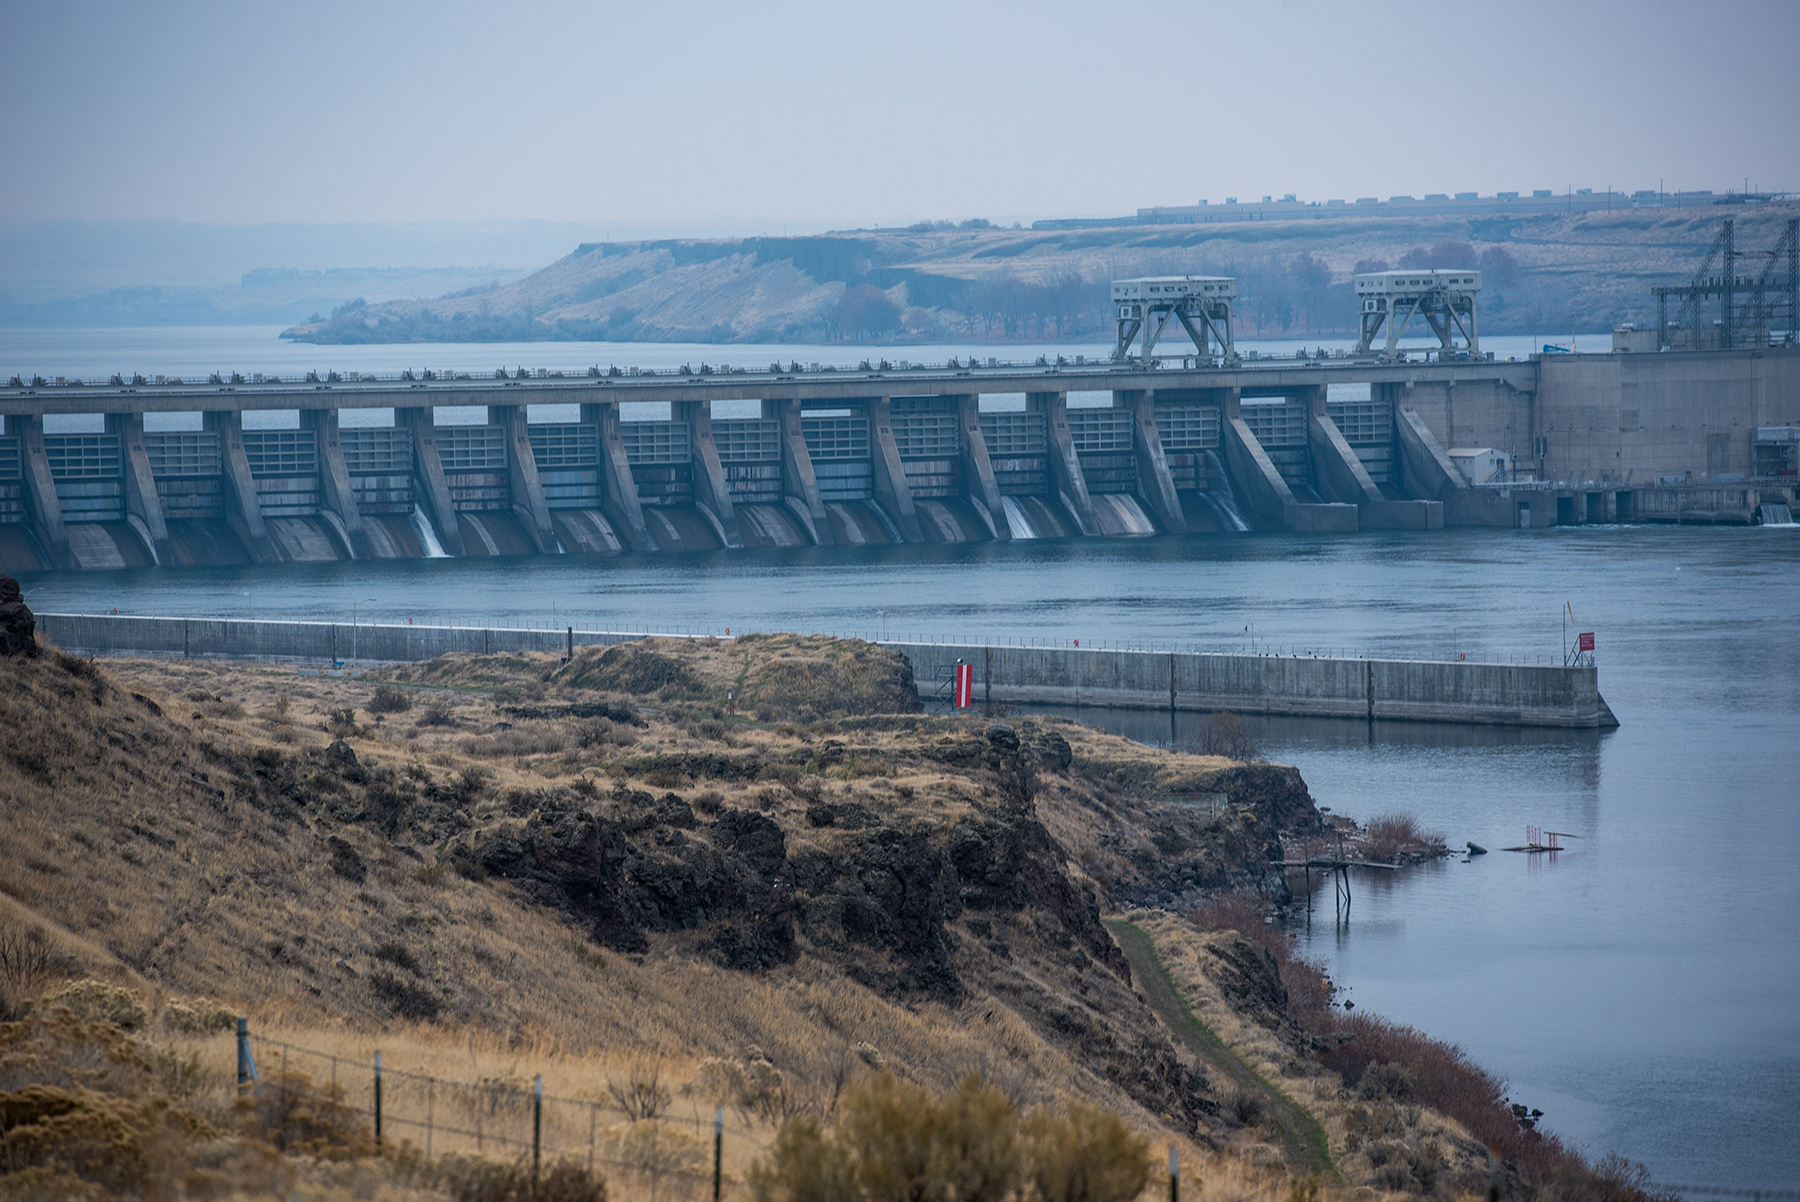 Hydropower helps ensure energy grid resilience, report says